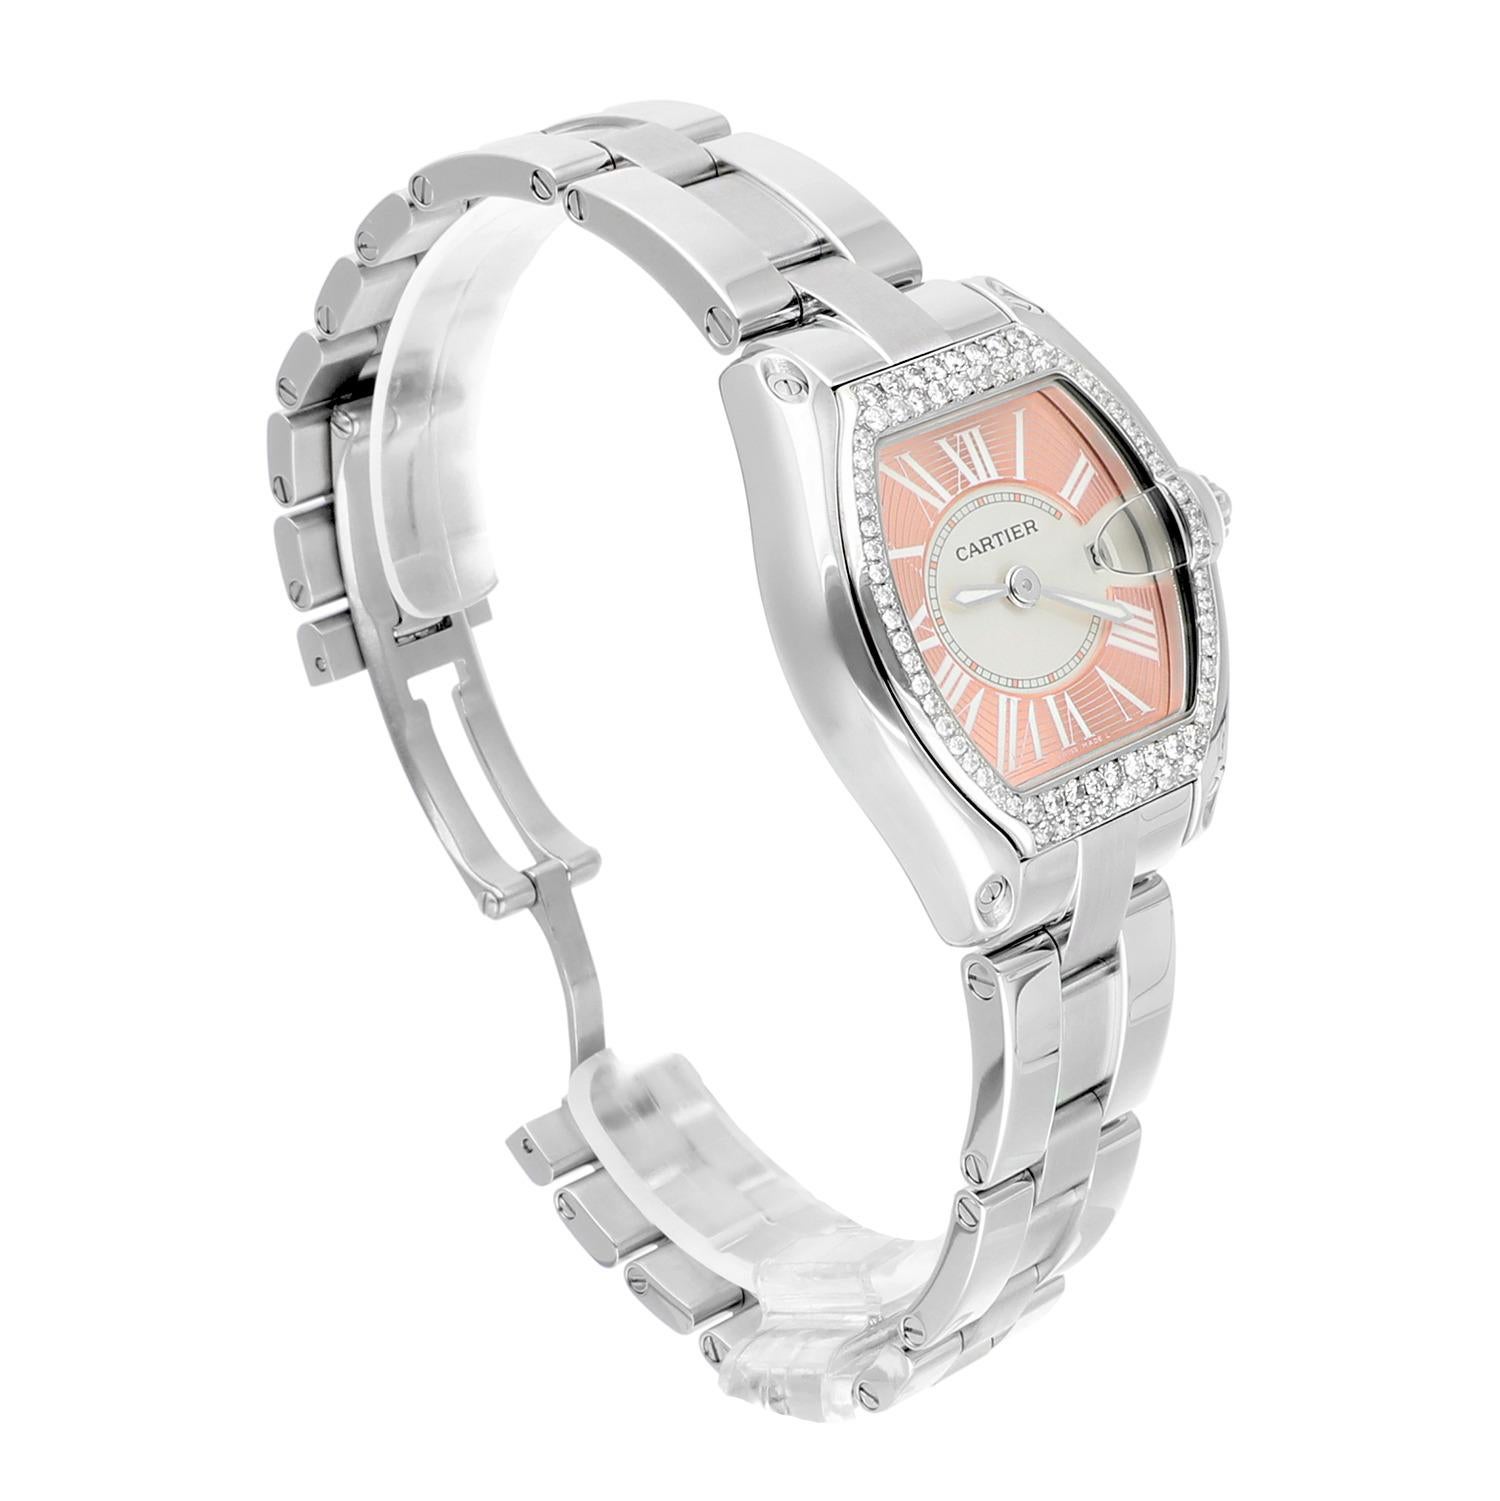 Cartier Roadster Sm NWMD46 Ladies Peach Dial Stainless Steel with Diamond Bezel In Excellent Condition For Sale In New York, NY